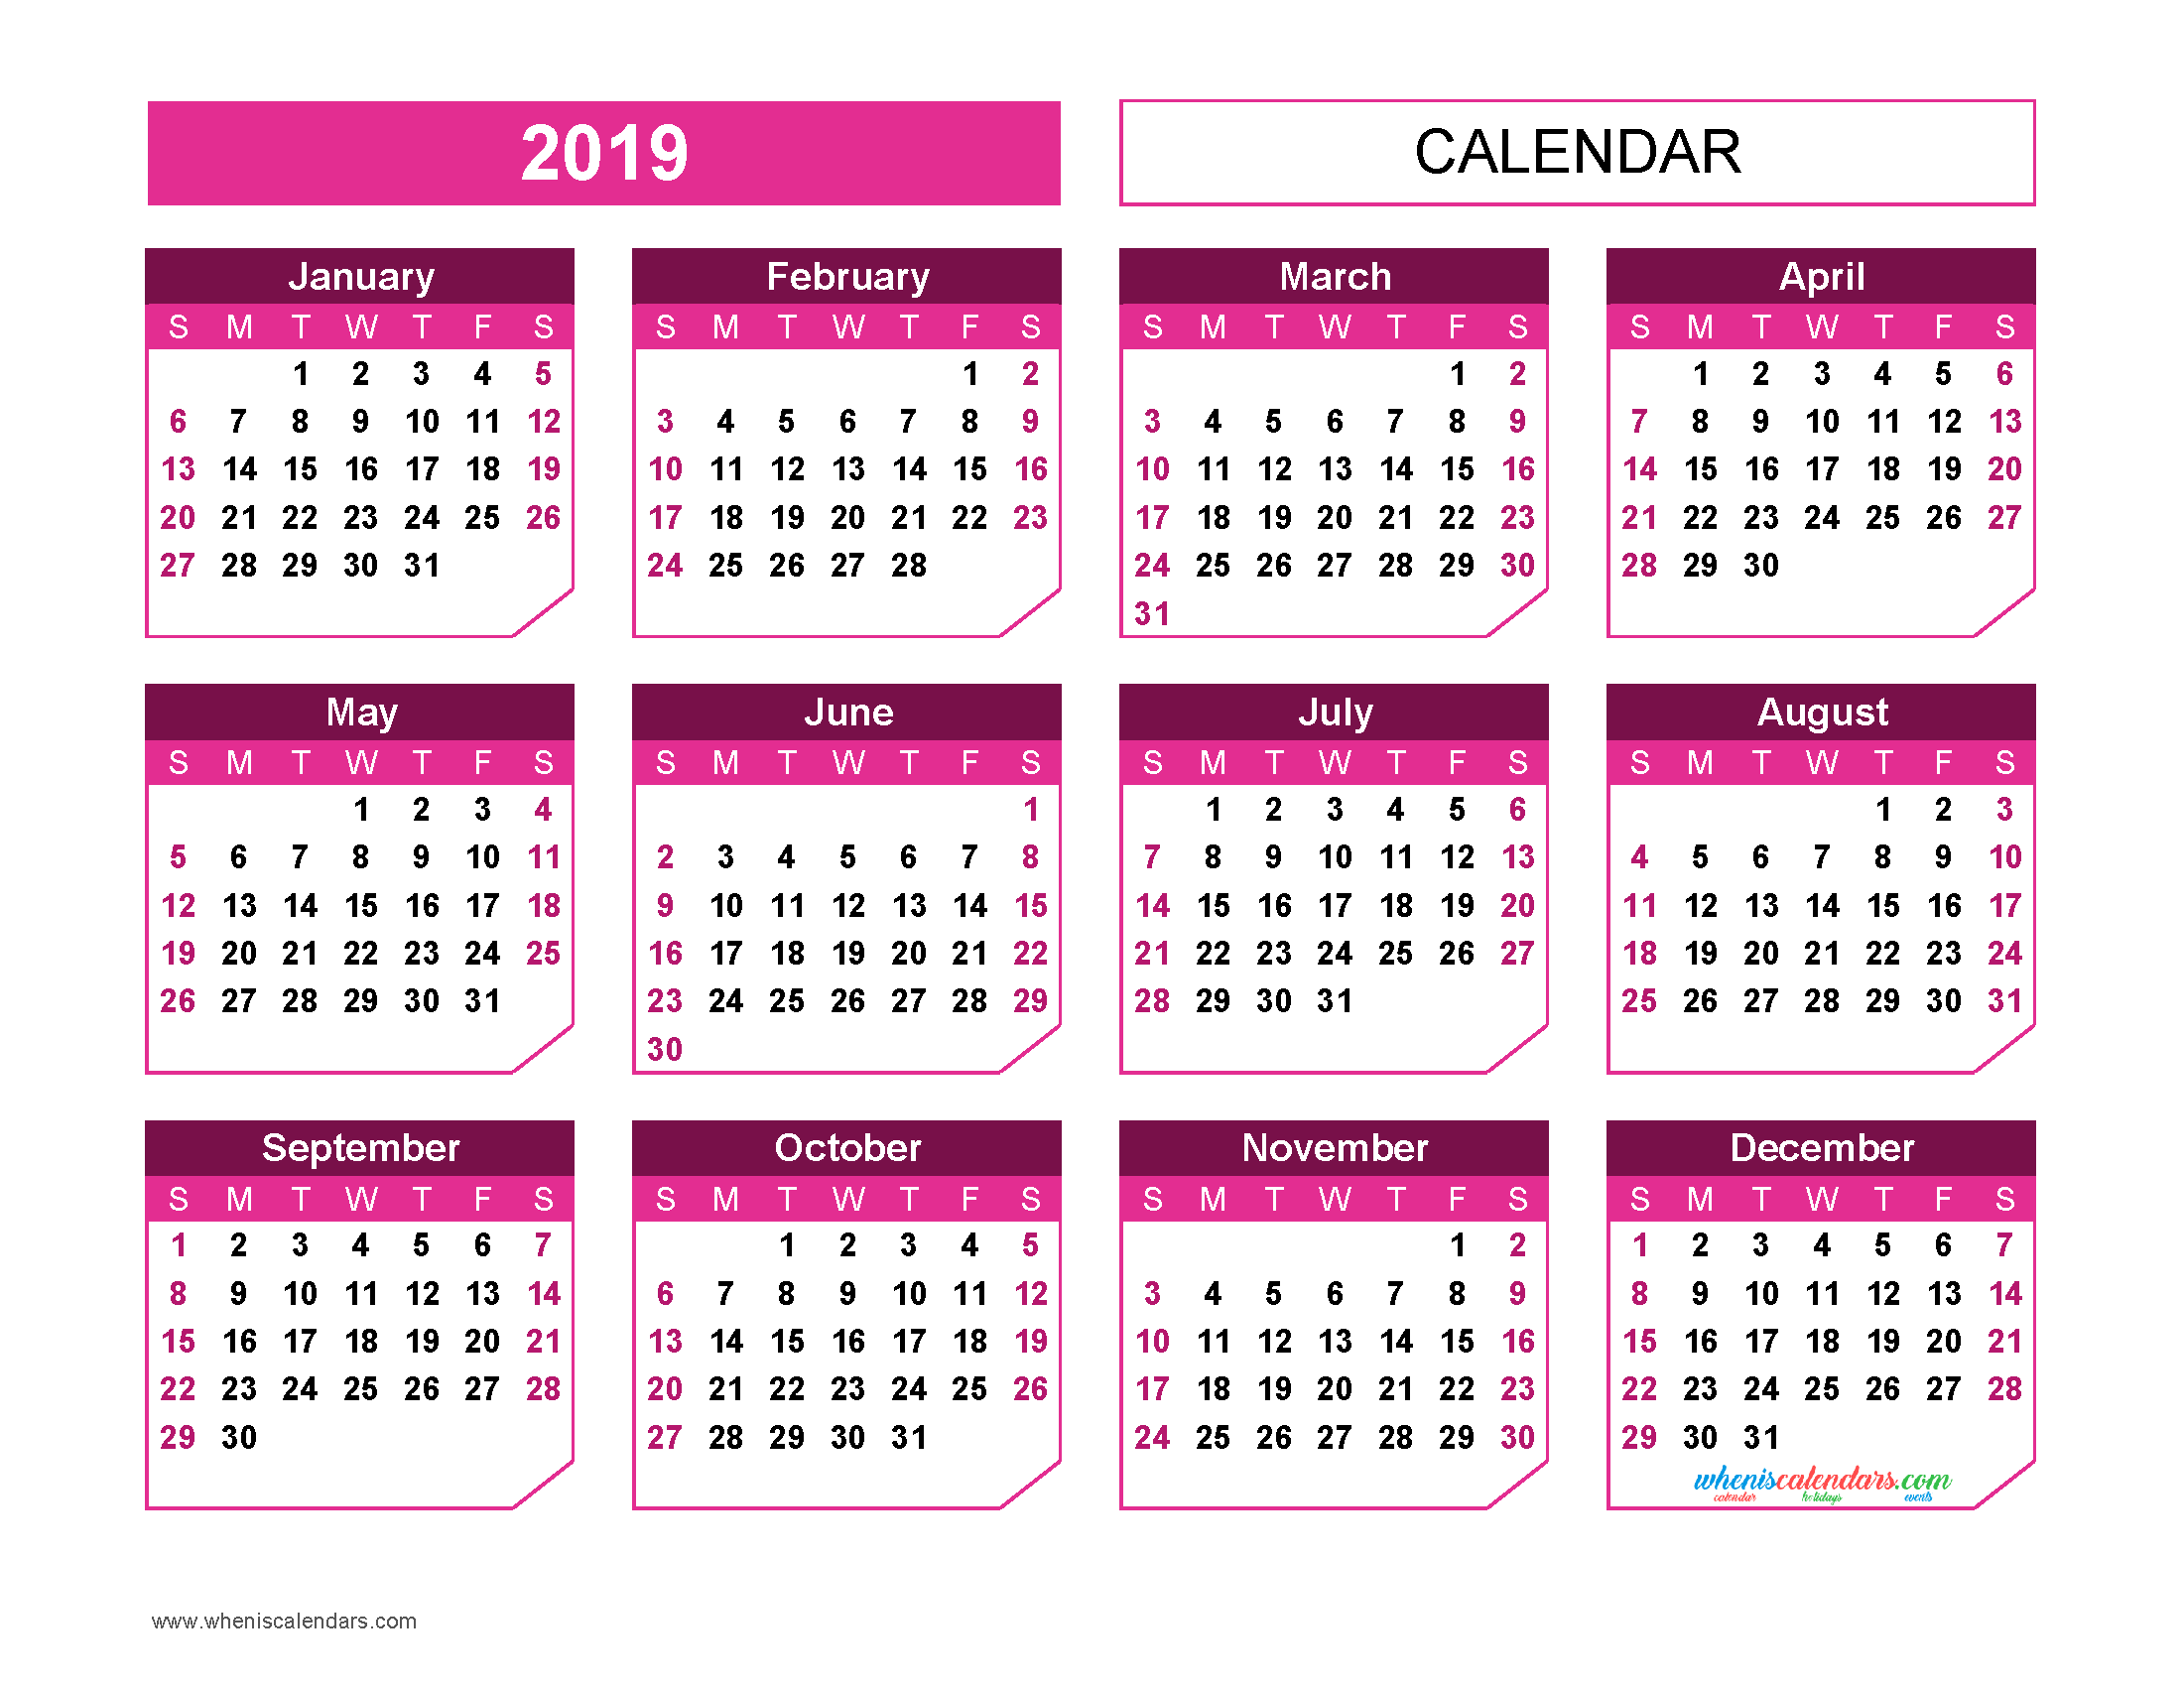 printable-2019-yearly-calendar-templates-us-edition-chamfer-redviolet